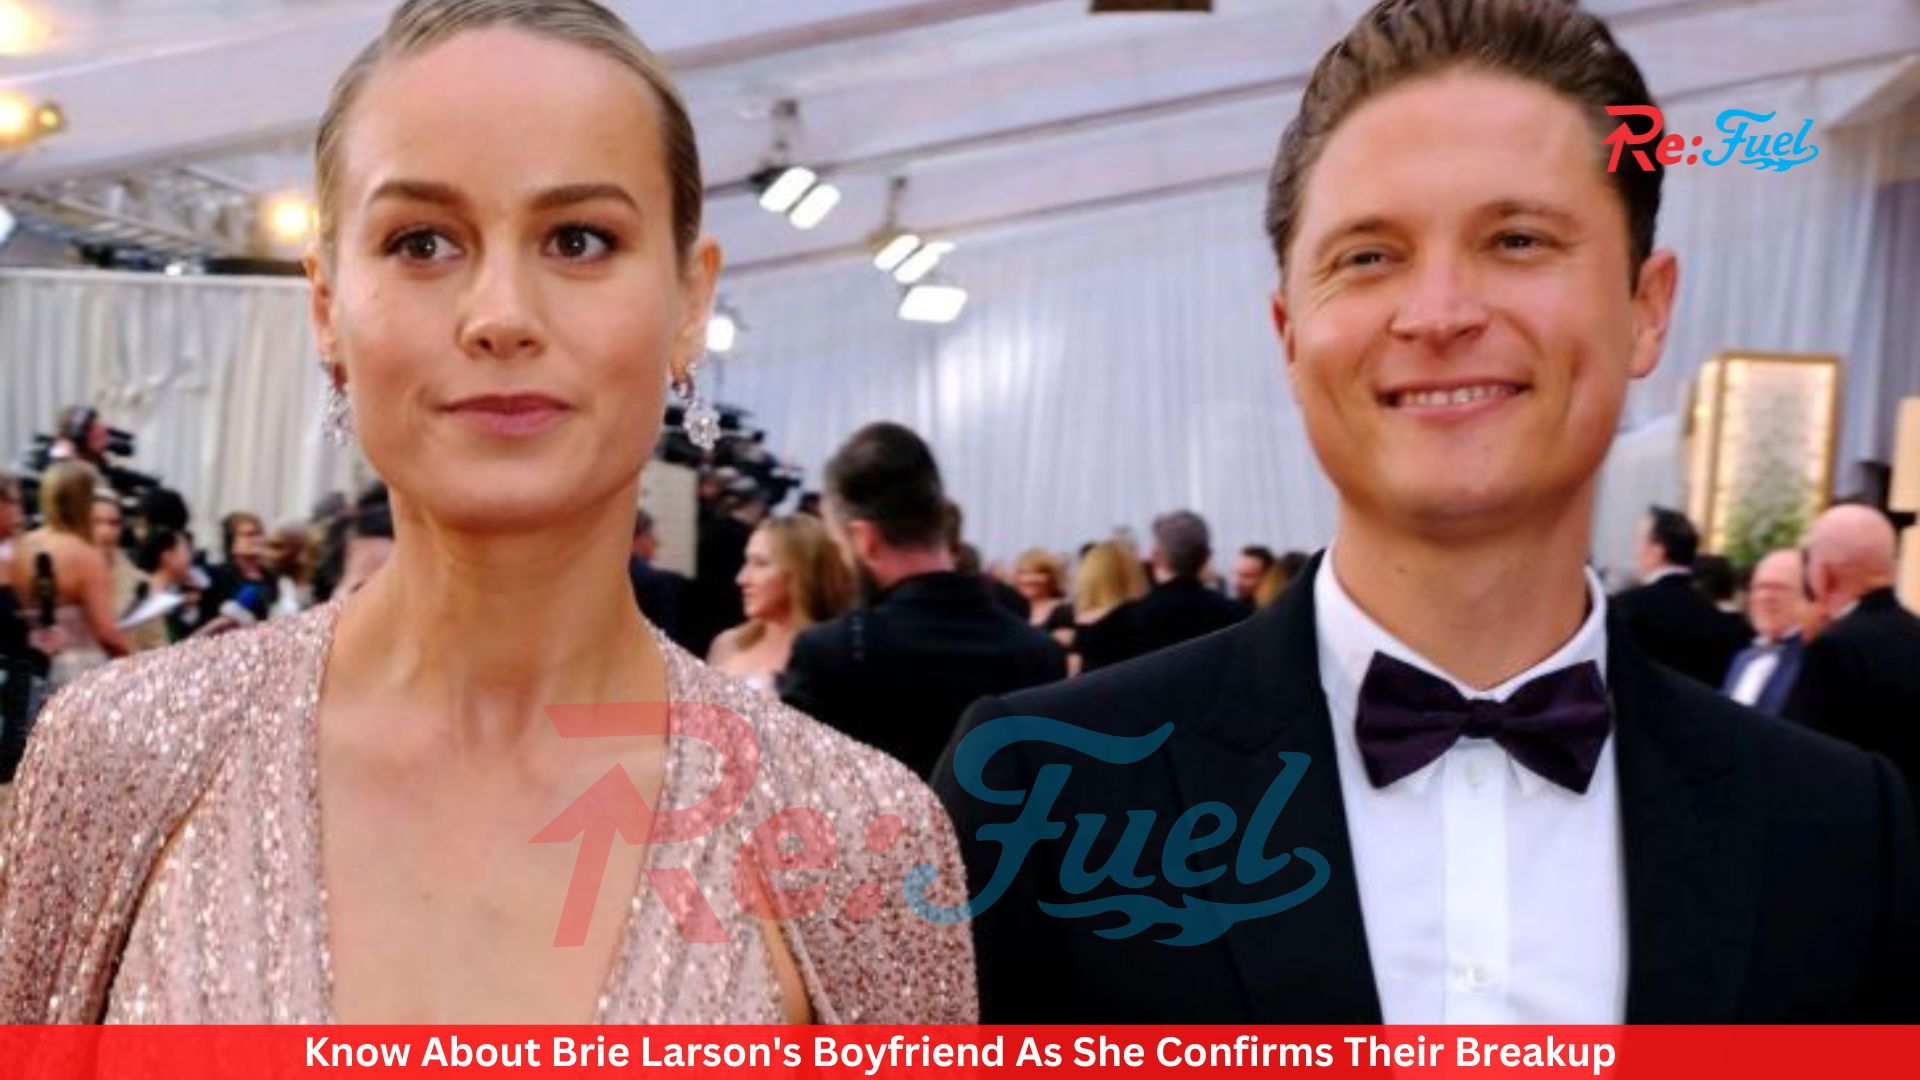 Know About Brie Larson's Boyfriend As She Confirms Their Breakup